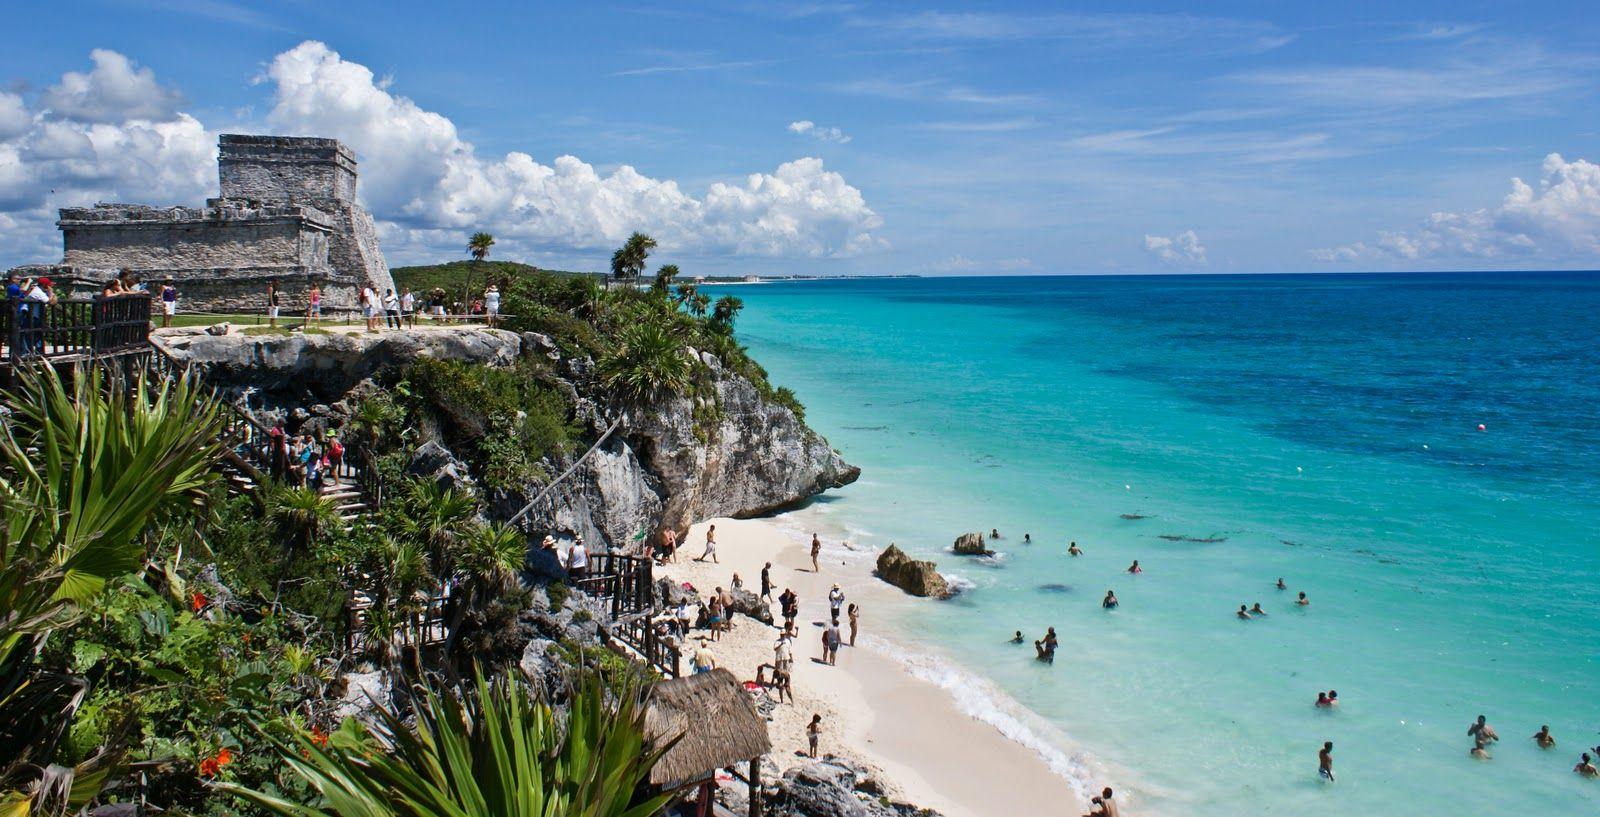 HD Tulum Wallpaper and Photo. HD Travelling Wallpaper